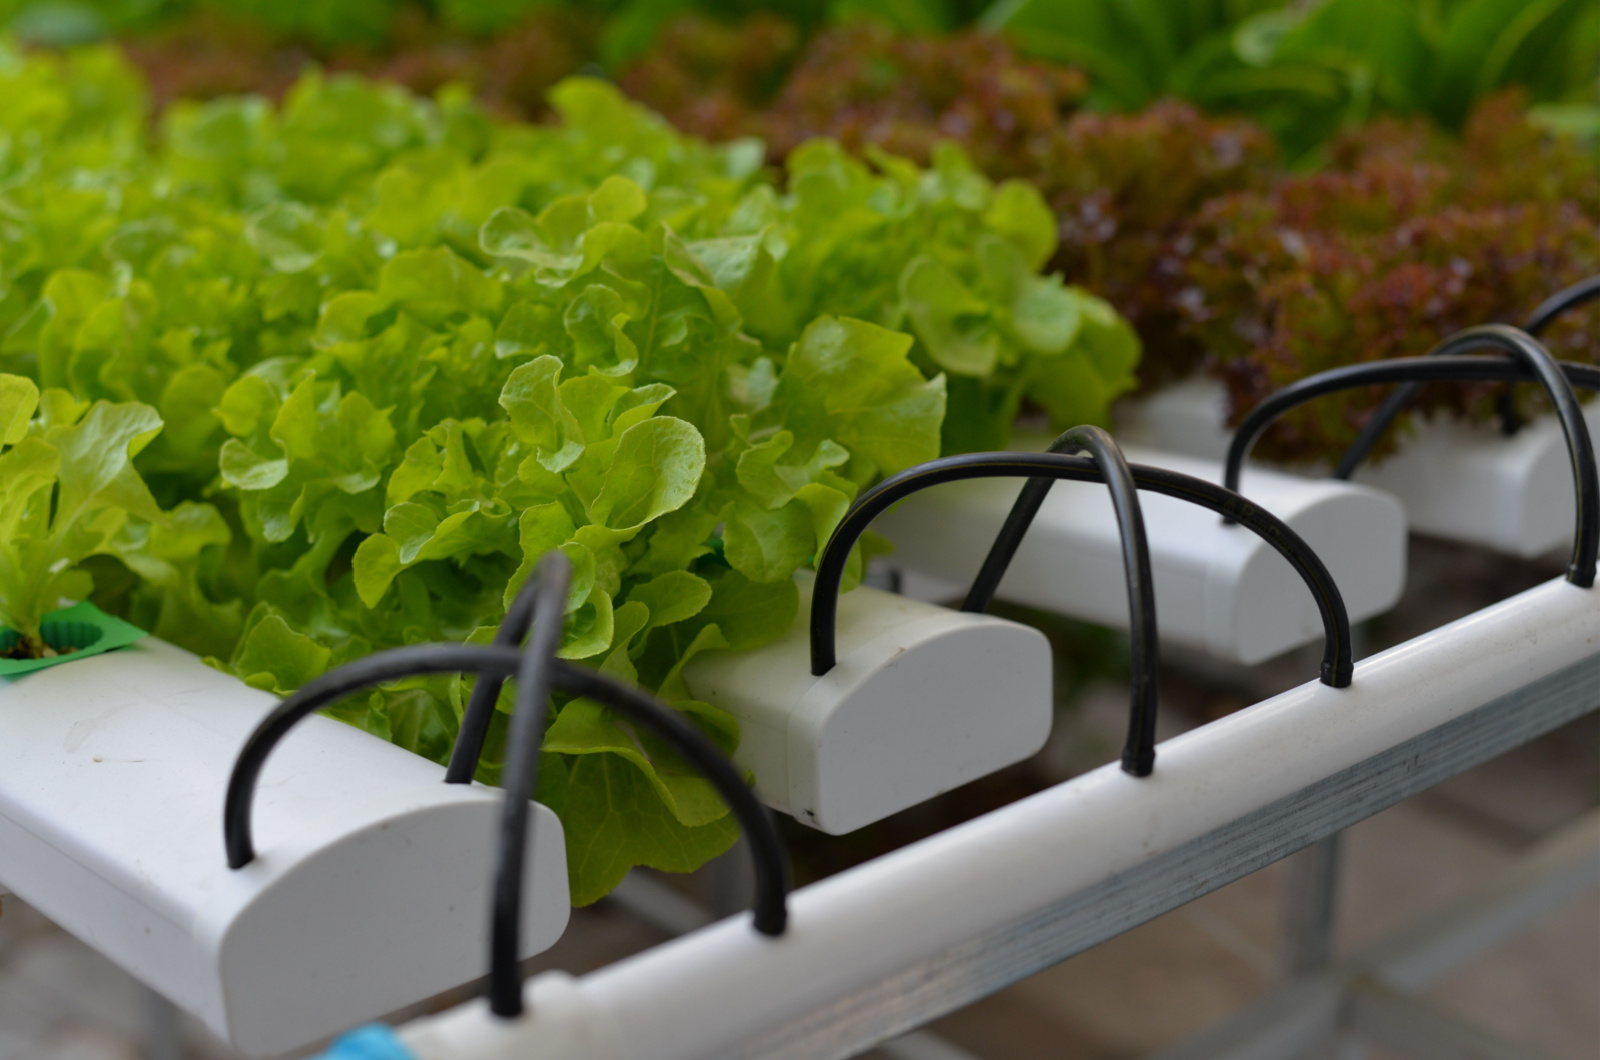 Salad Vegetables Grown in a Hydroponic Nutrient Film Technique